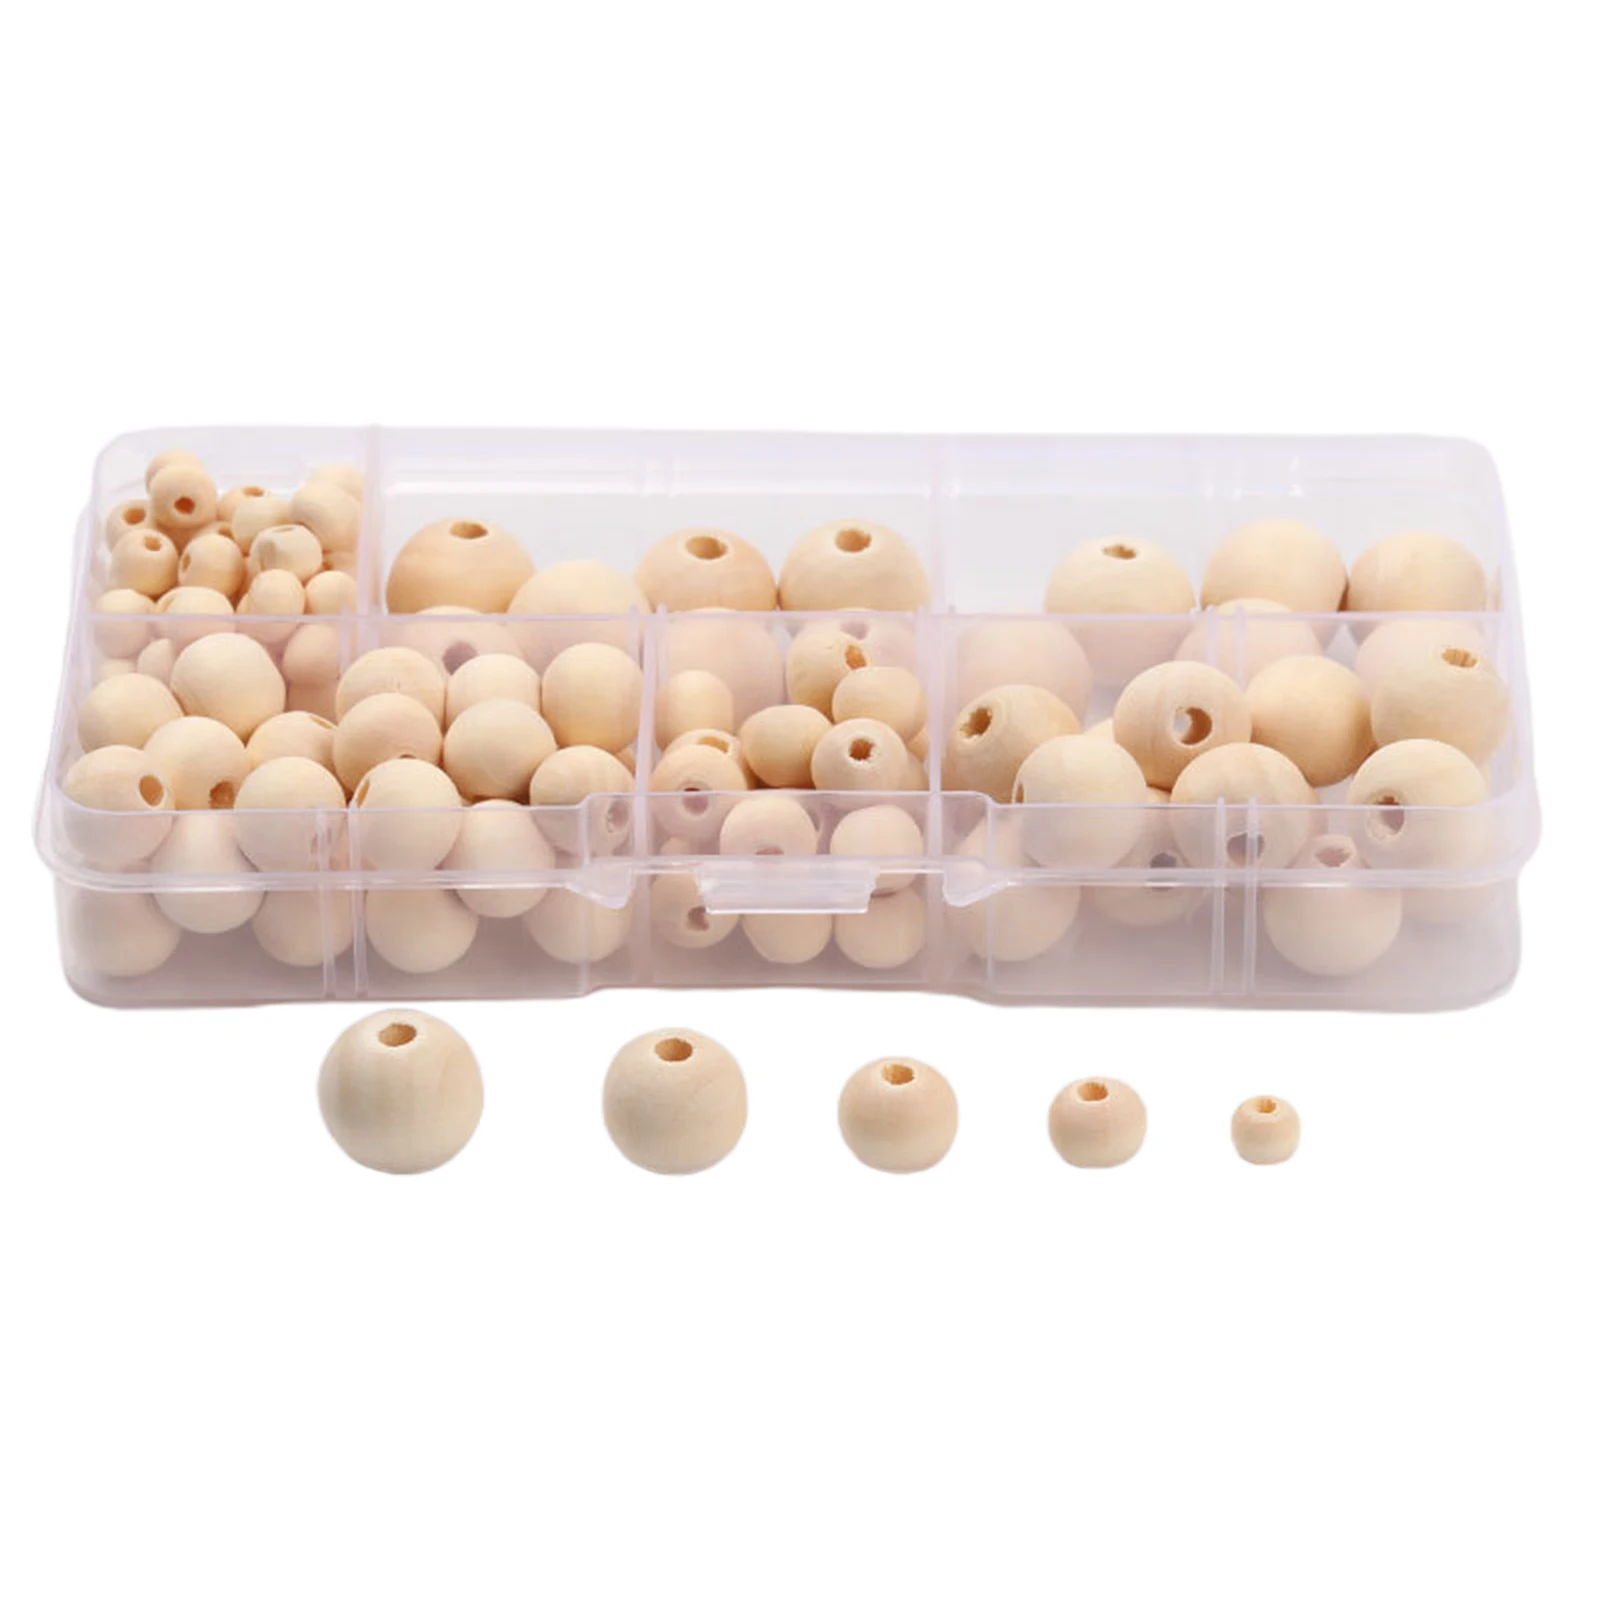 300pcs Natural Round Wood Bead Unpainted Wooden Ball Beads DIY Craft Jewelry